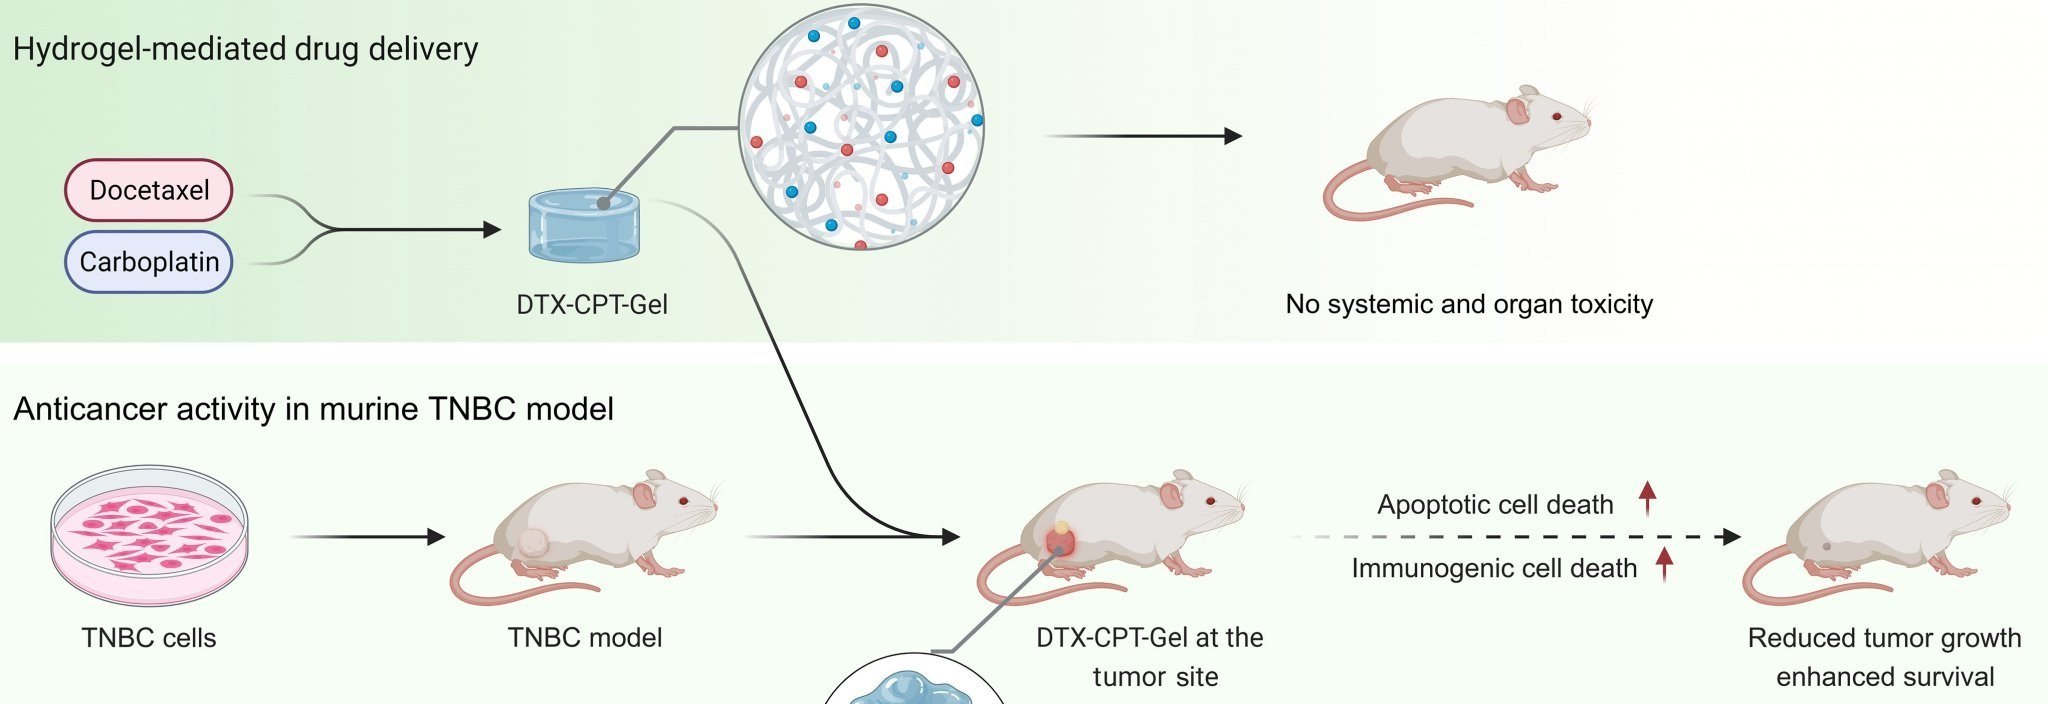 DTX-CPT-Gel therapy kills cancer cells and trains immune cells to do the same. Source: Kar et tal, DOI: 10.1126/sciadv.adf2746, CC BY-NC